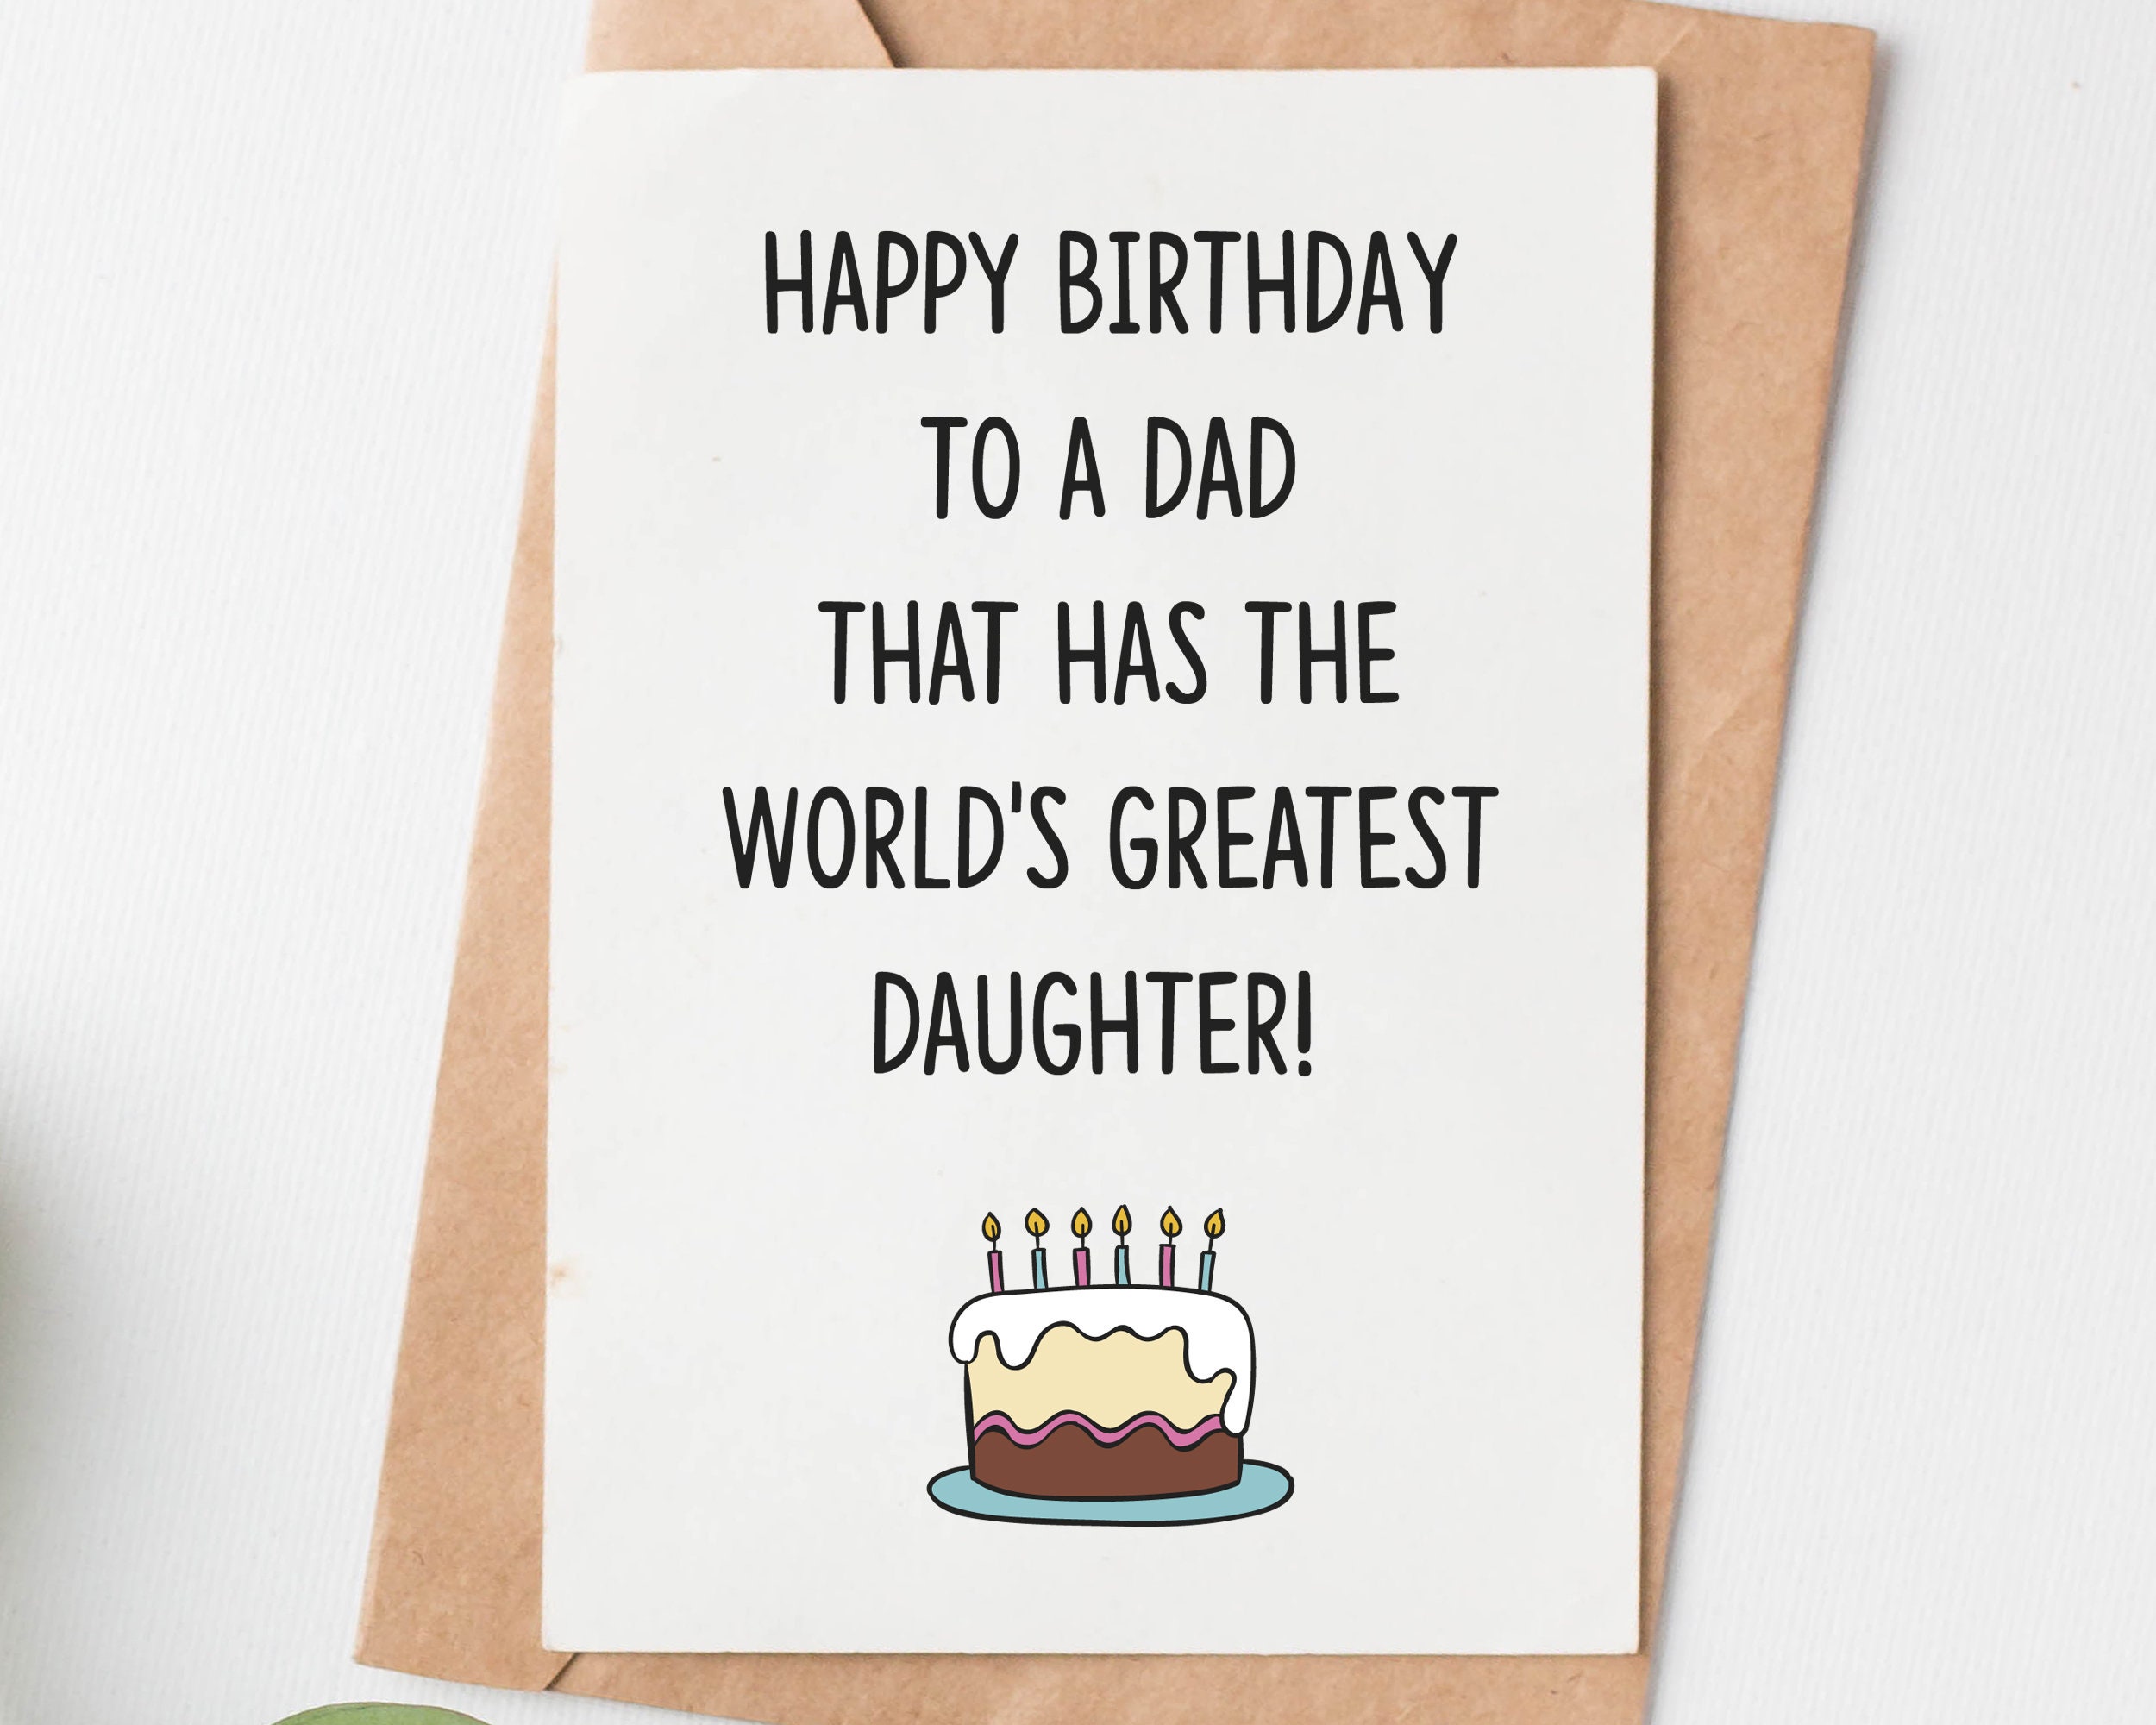 how to make a birthday card for dad birthday cards for dad from - funny ...